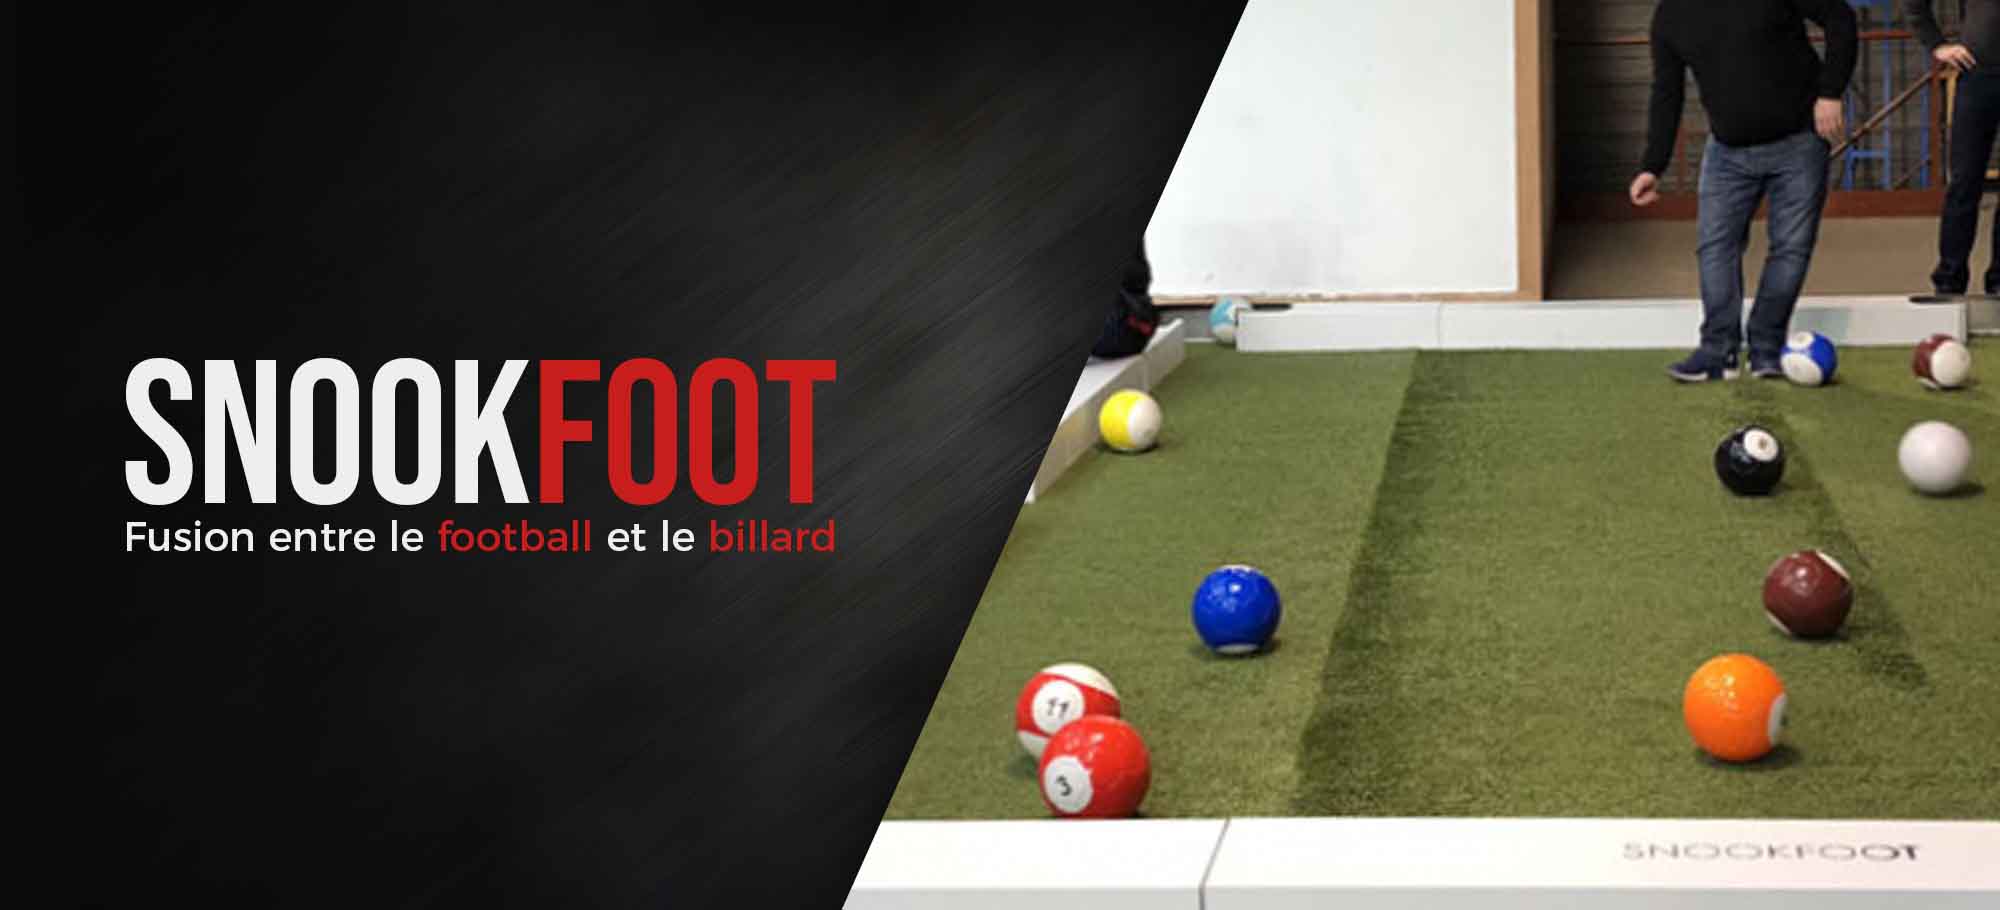 You are currently viewing Le Snookfoot, fusion entre le football et le billard